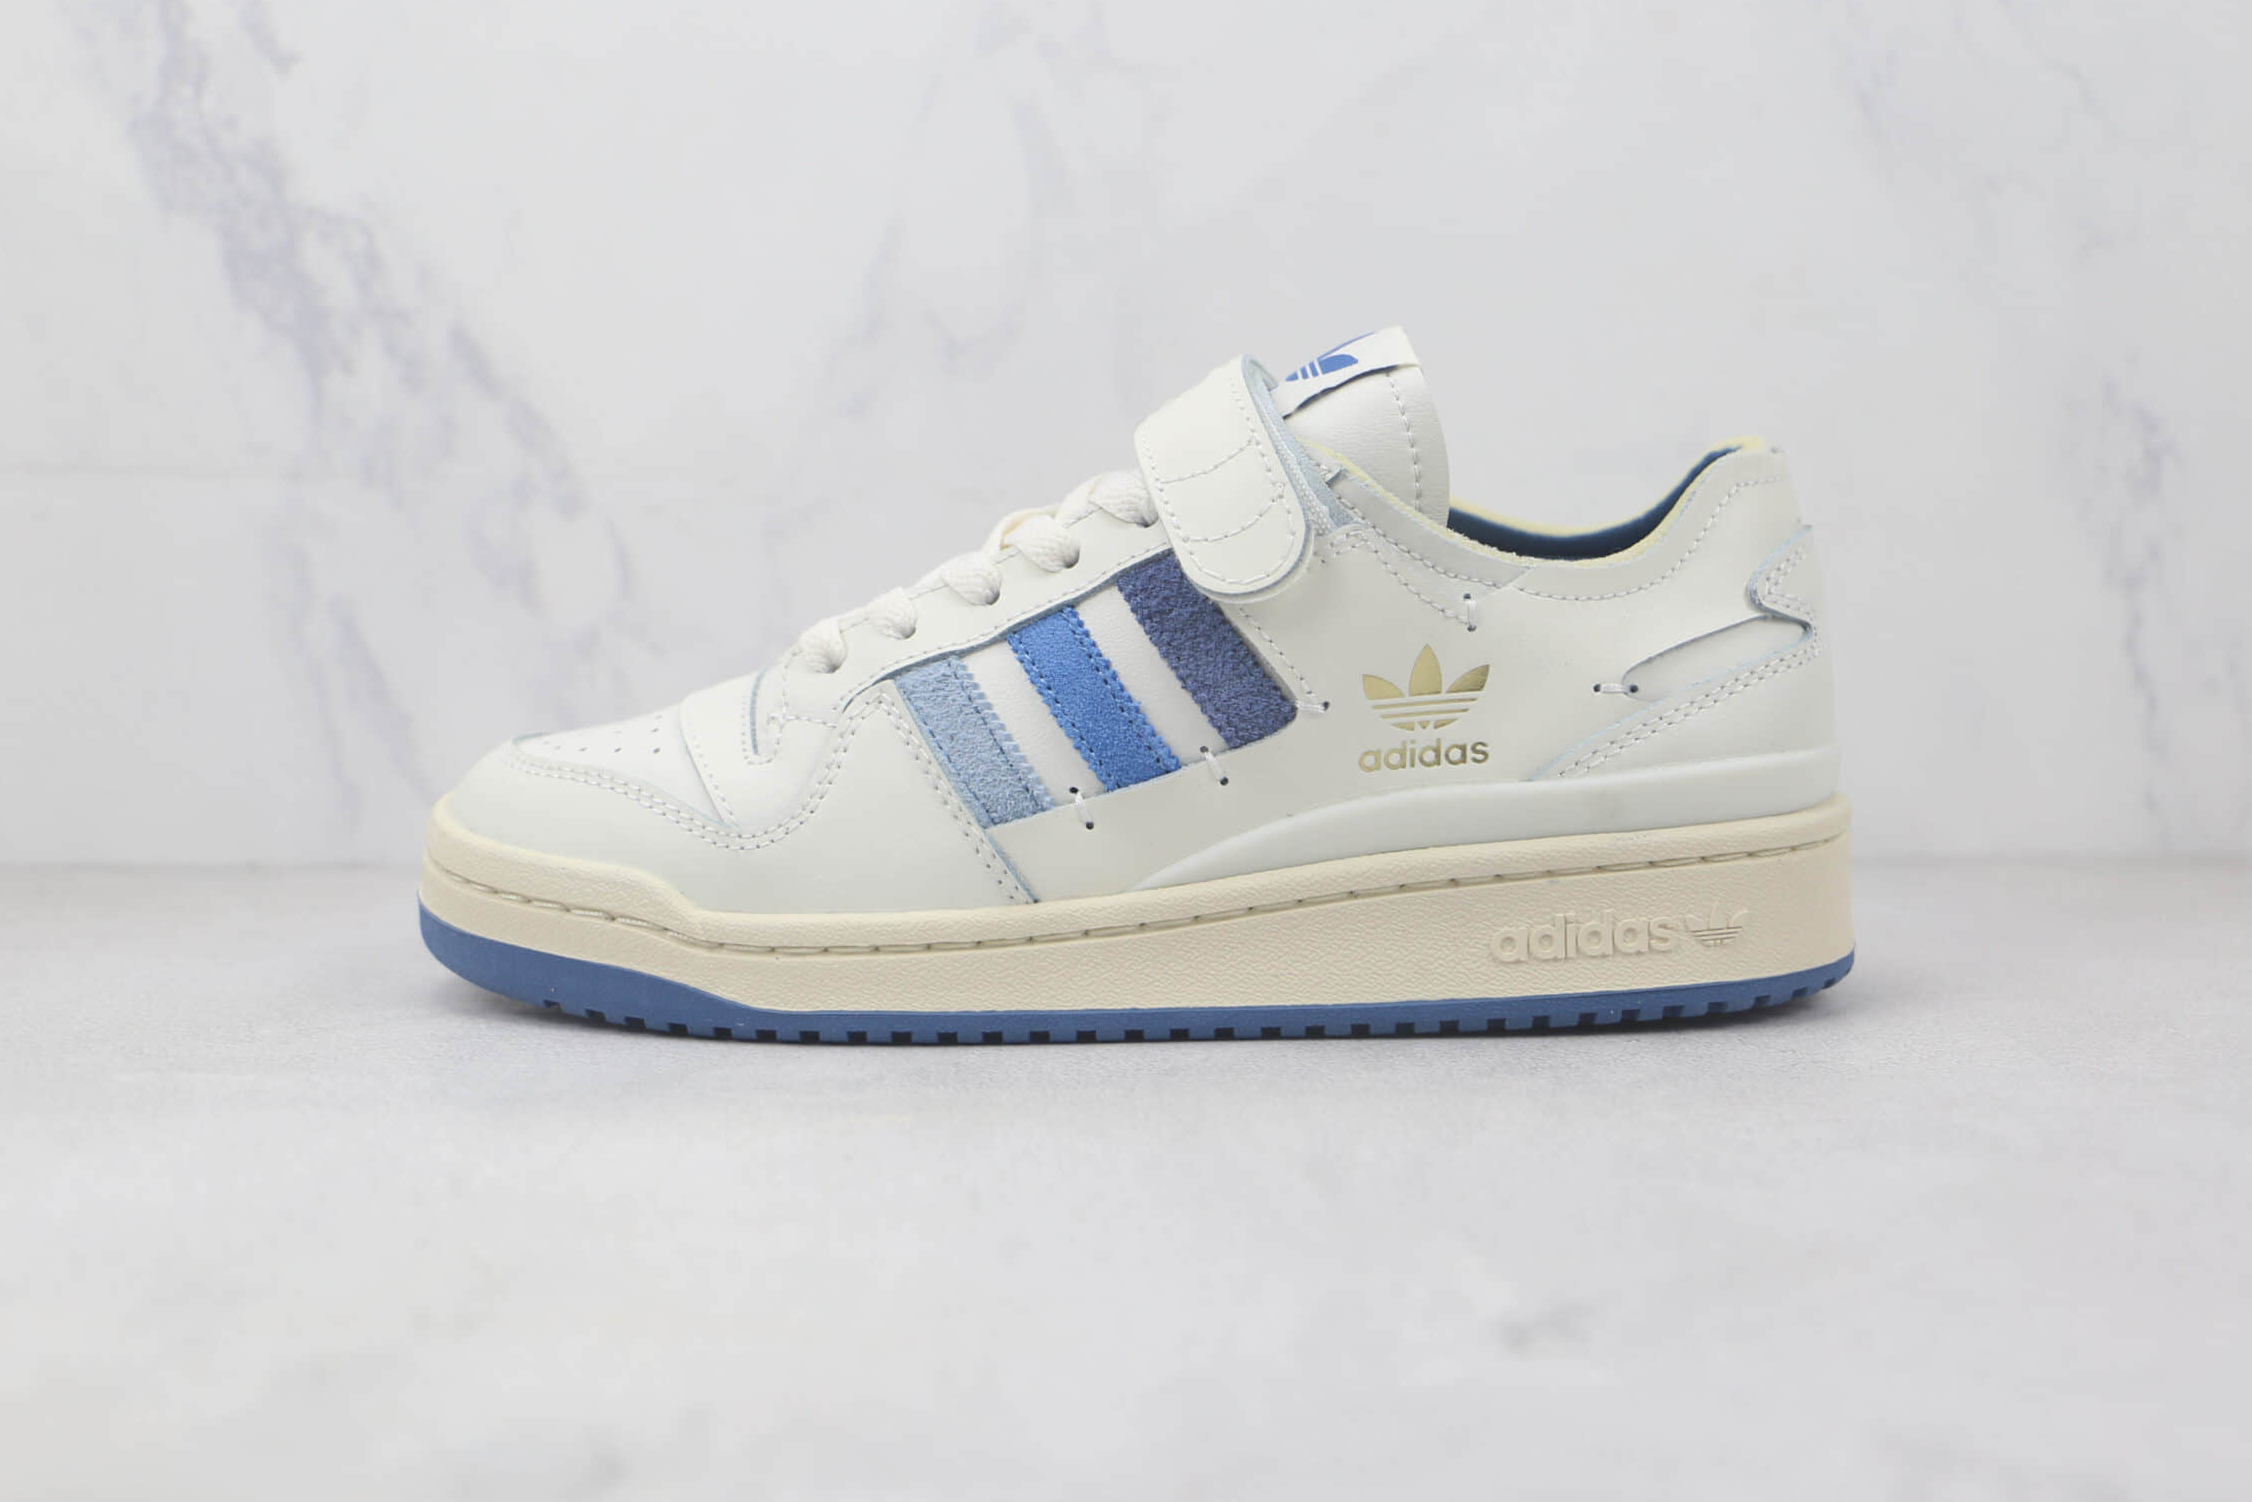 Adidas Forum 84 Low 'White Altered Blue' GW4333 - Classic Style with a Modern Twist